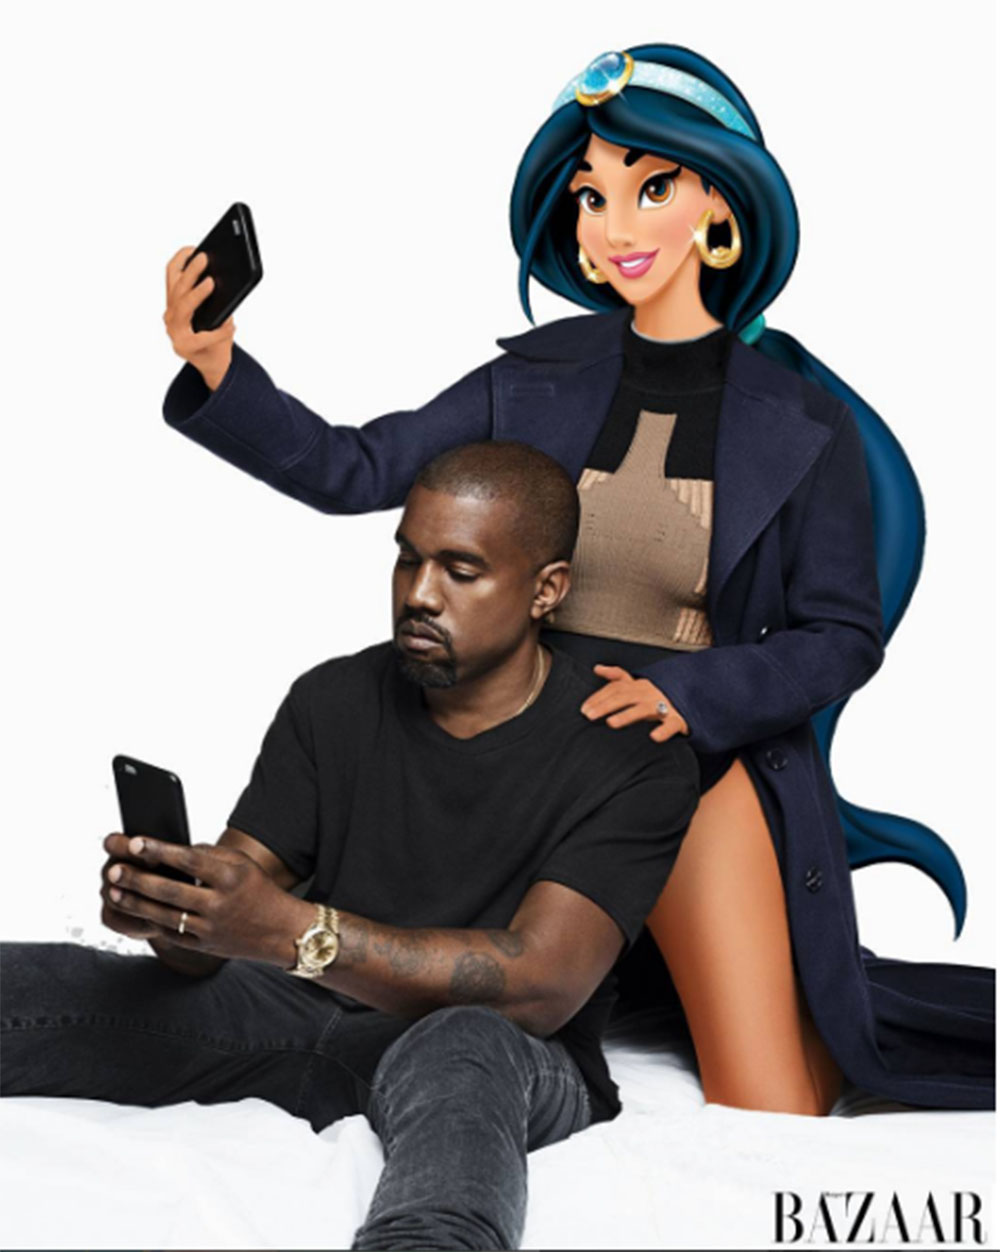 Kanye and his 'Jasmine' doing what they do best for Harper's Bazaar's cover issue.